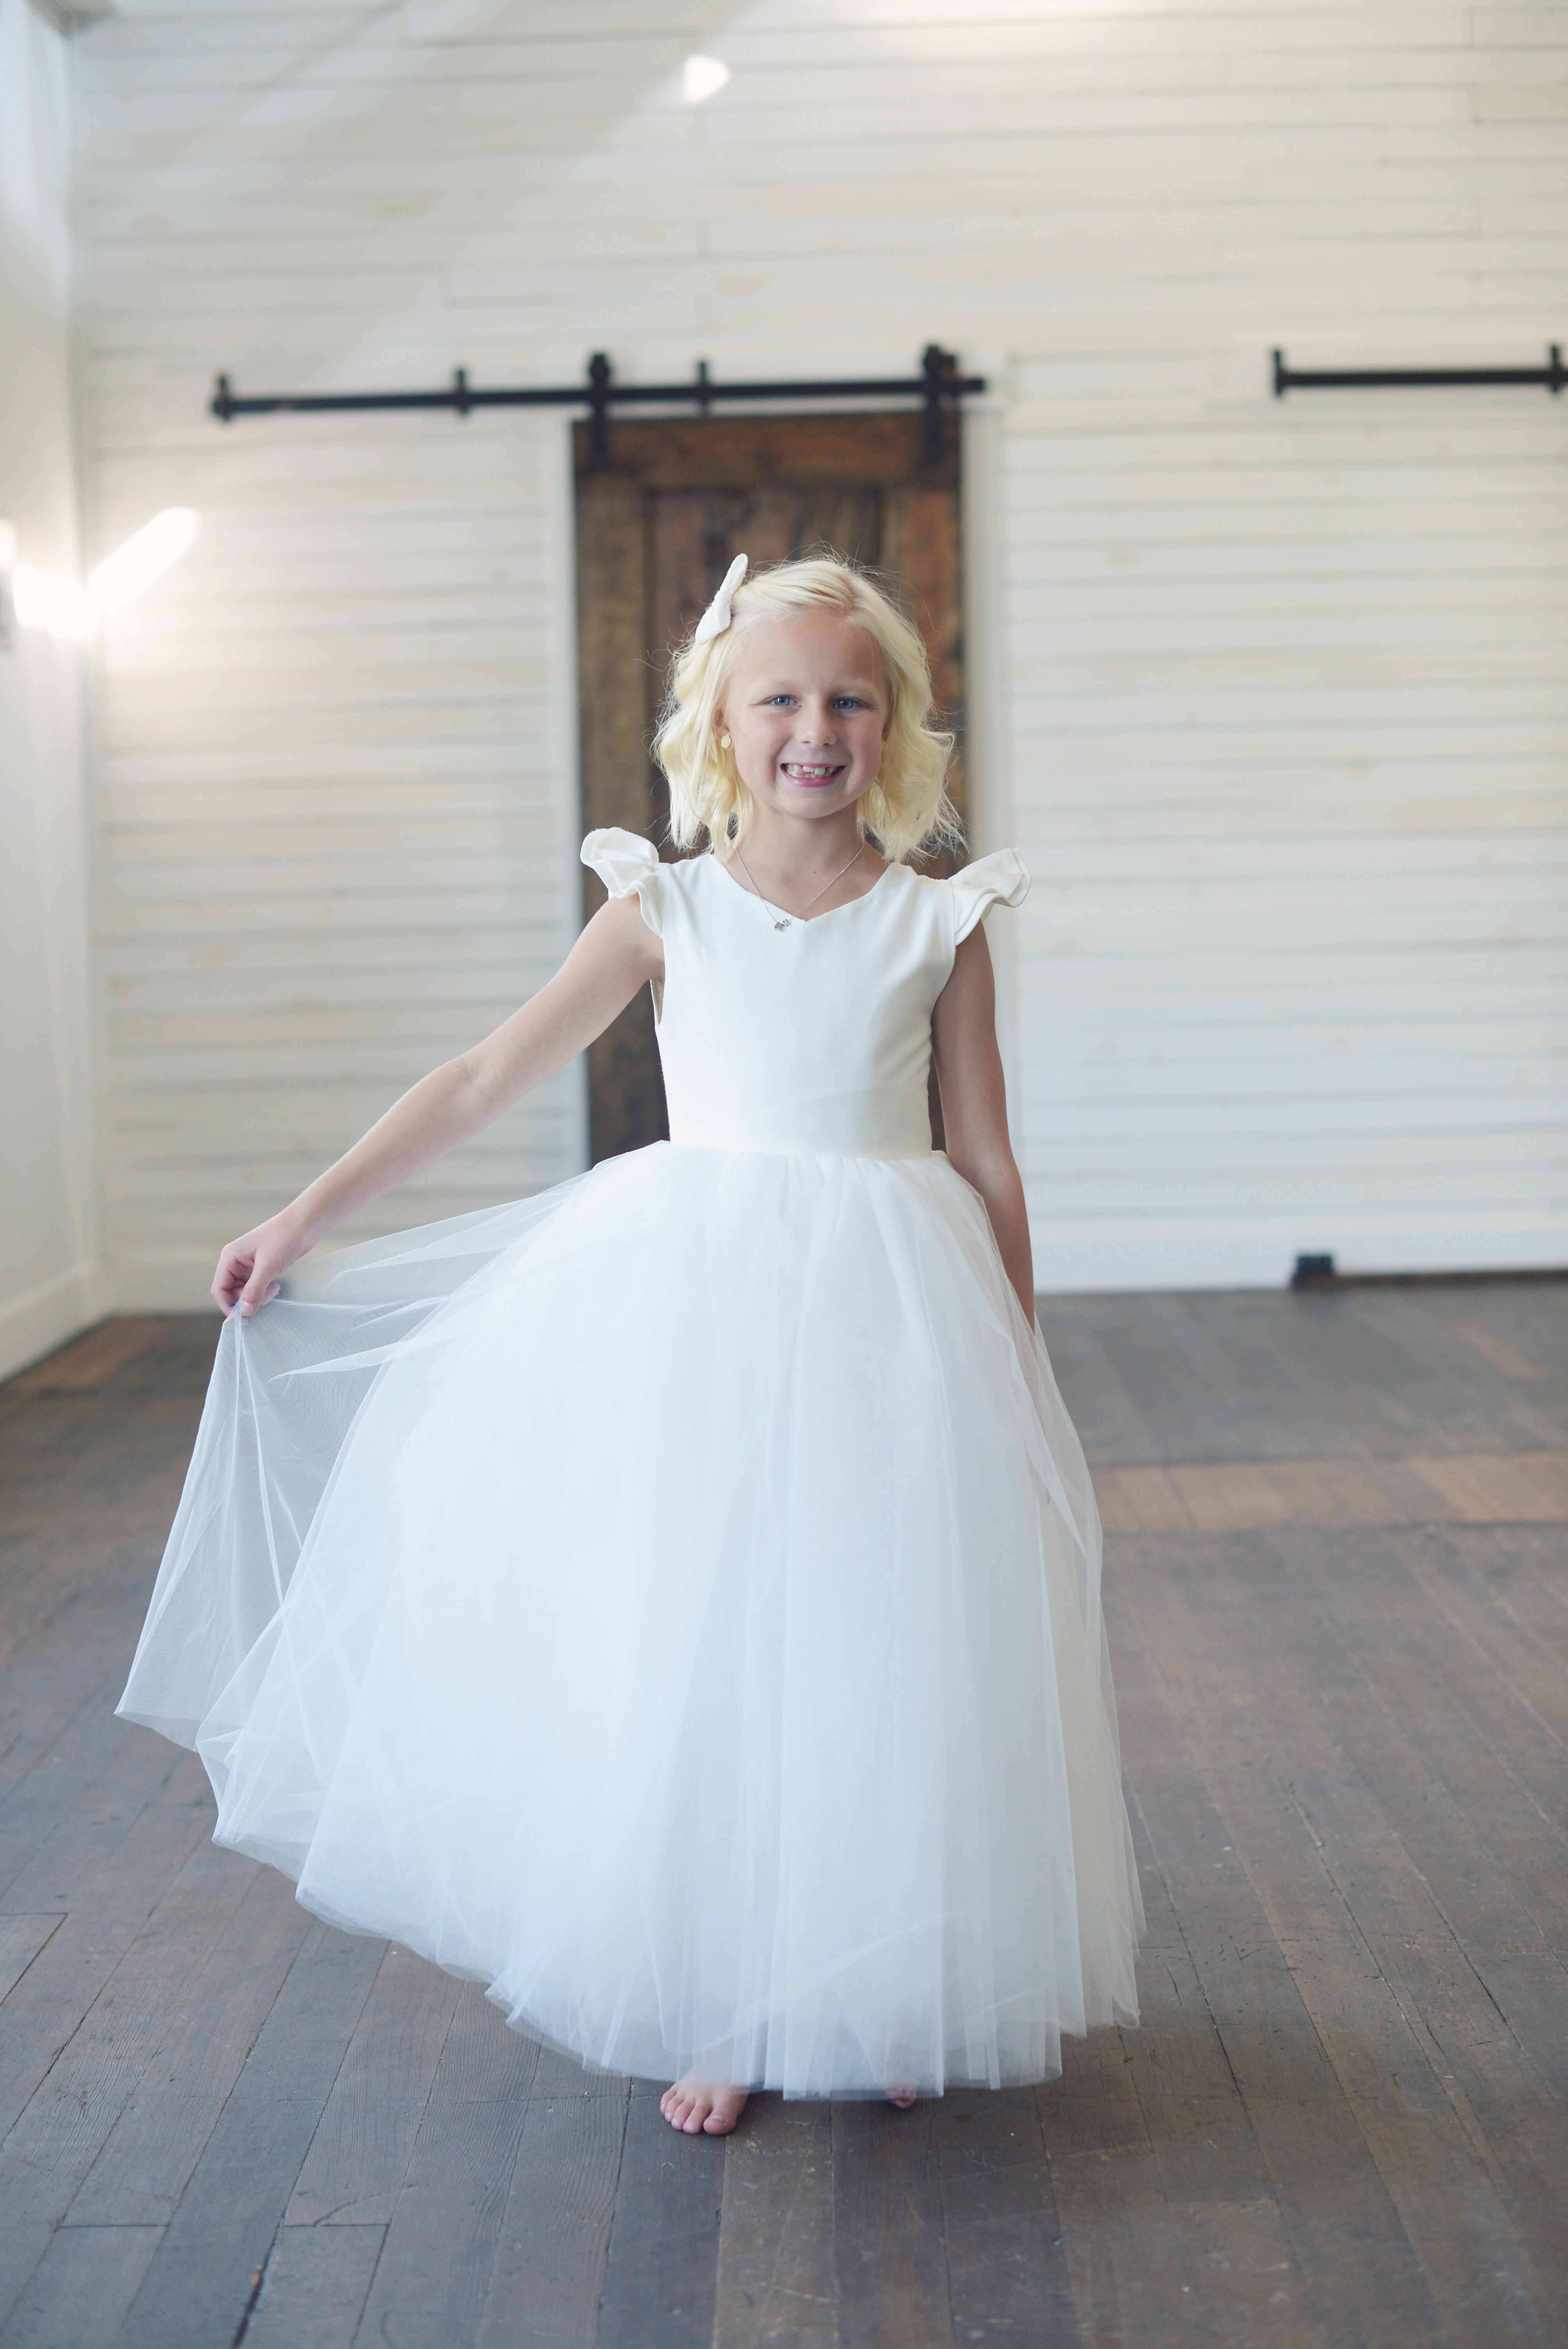 Introducing the Exquisite Victoria Flower Girl Gown